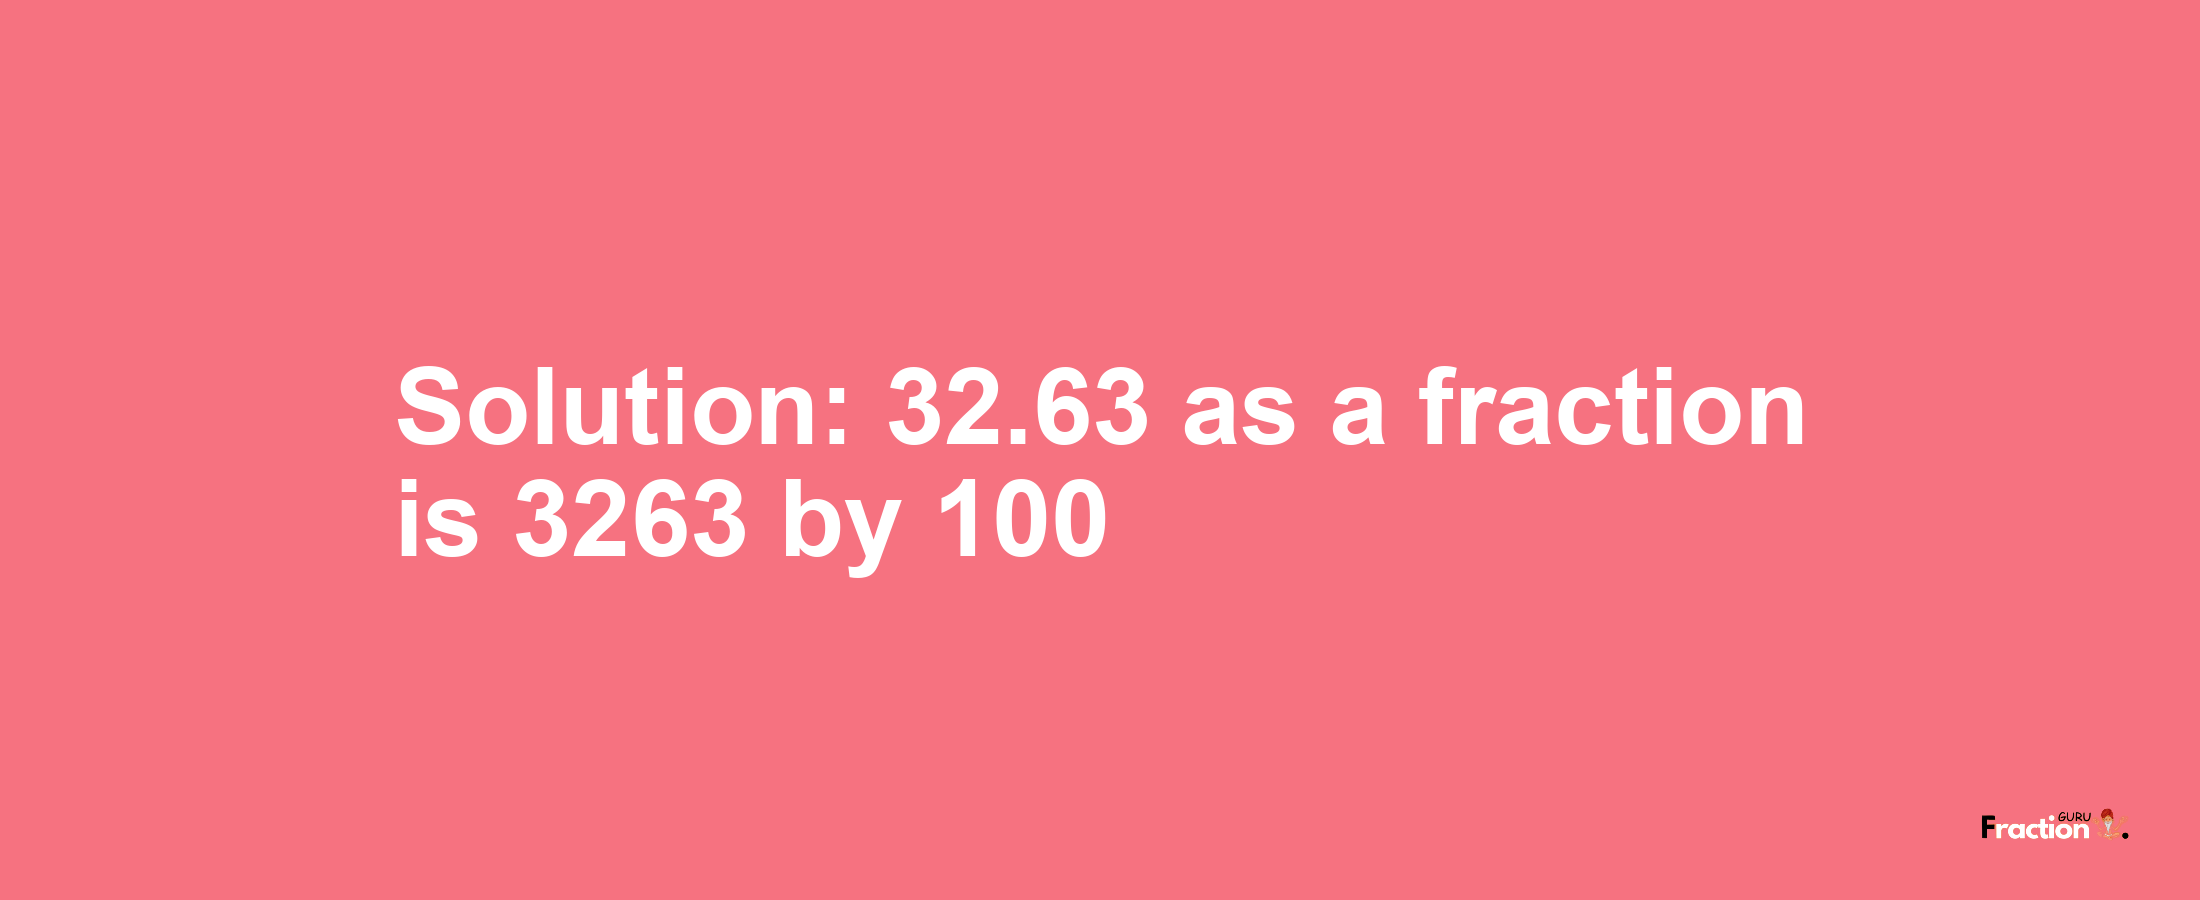 Solution:32.63 as a fraction is 3263/100